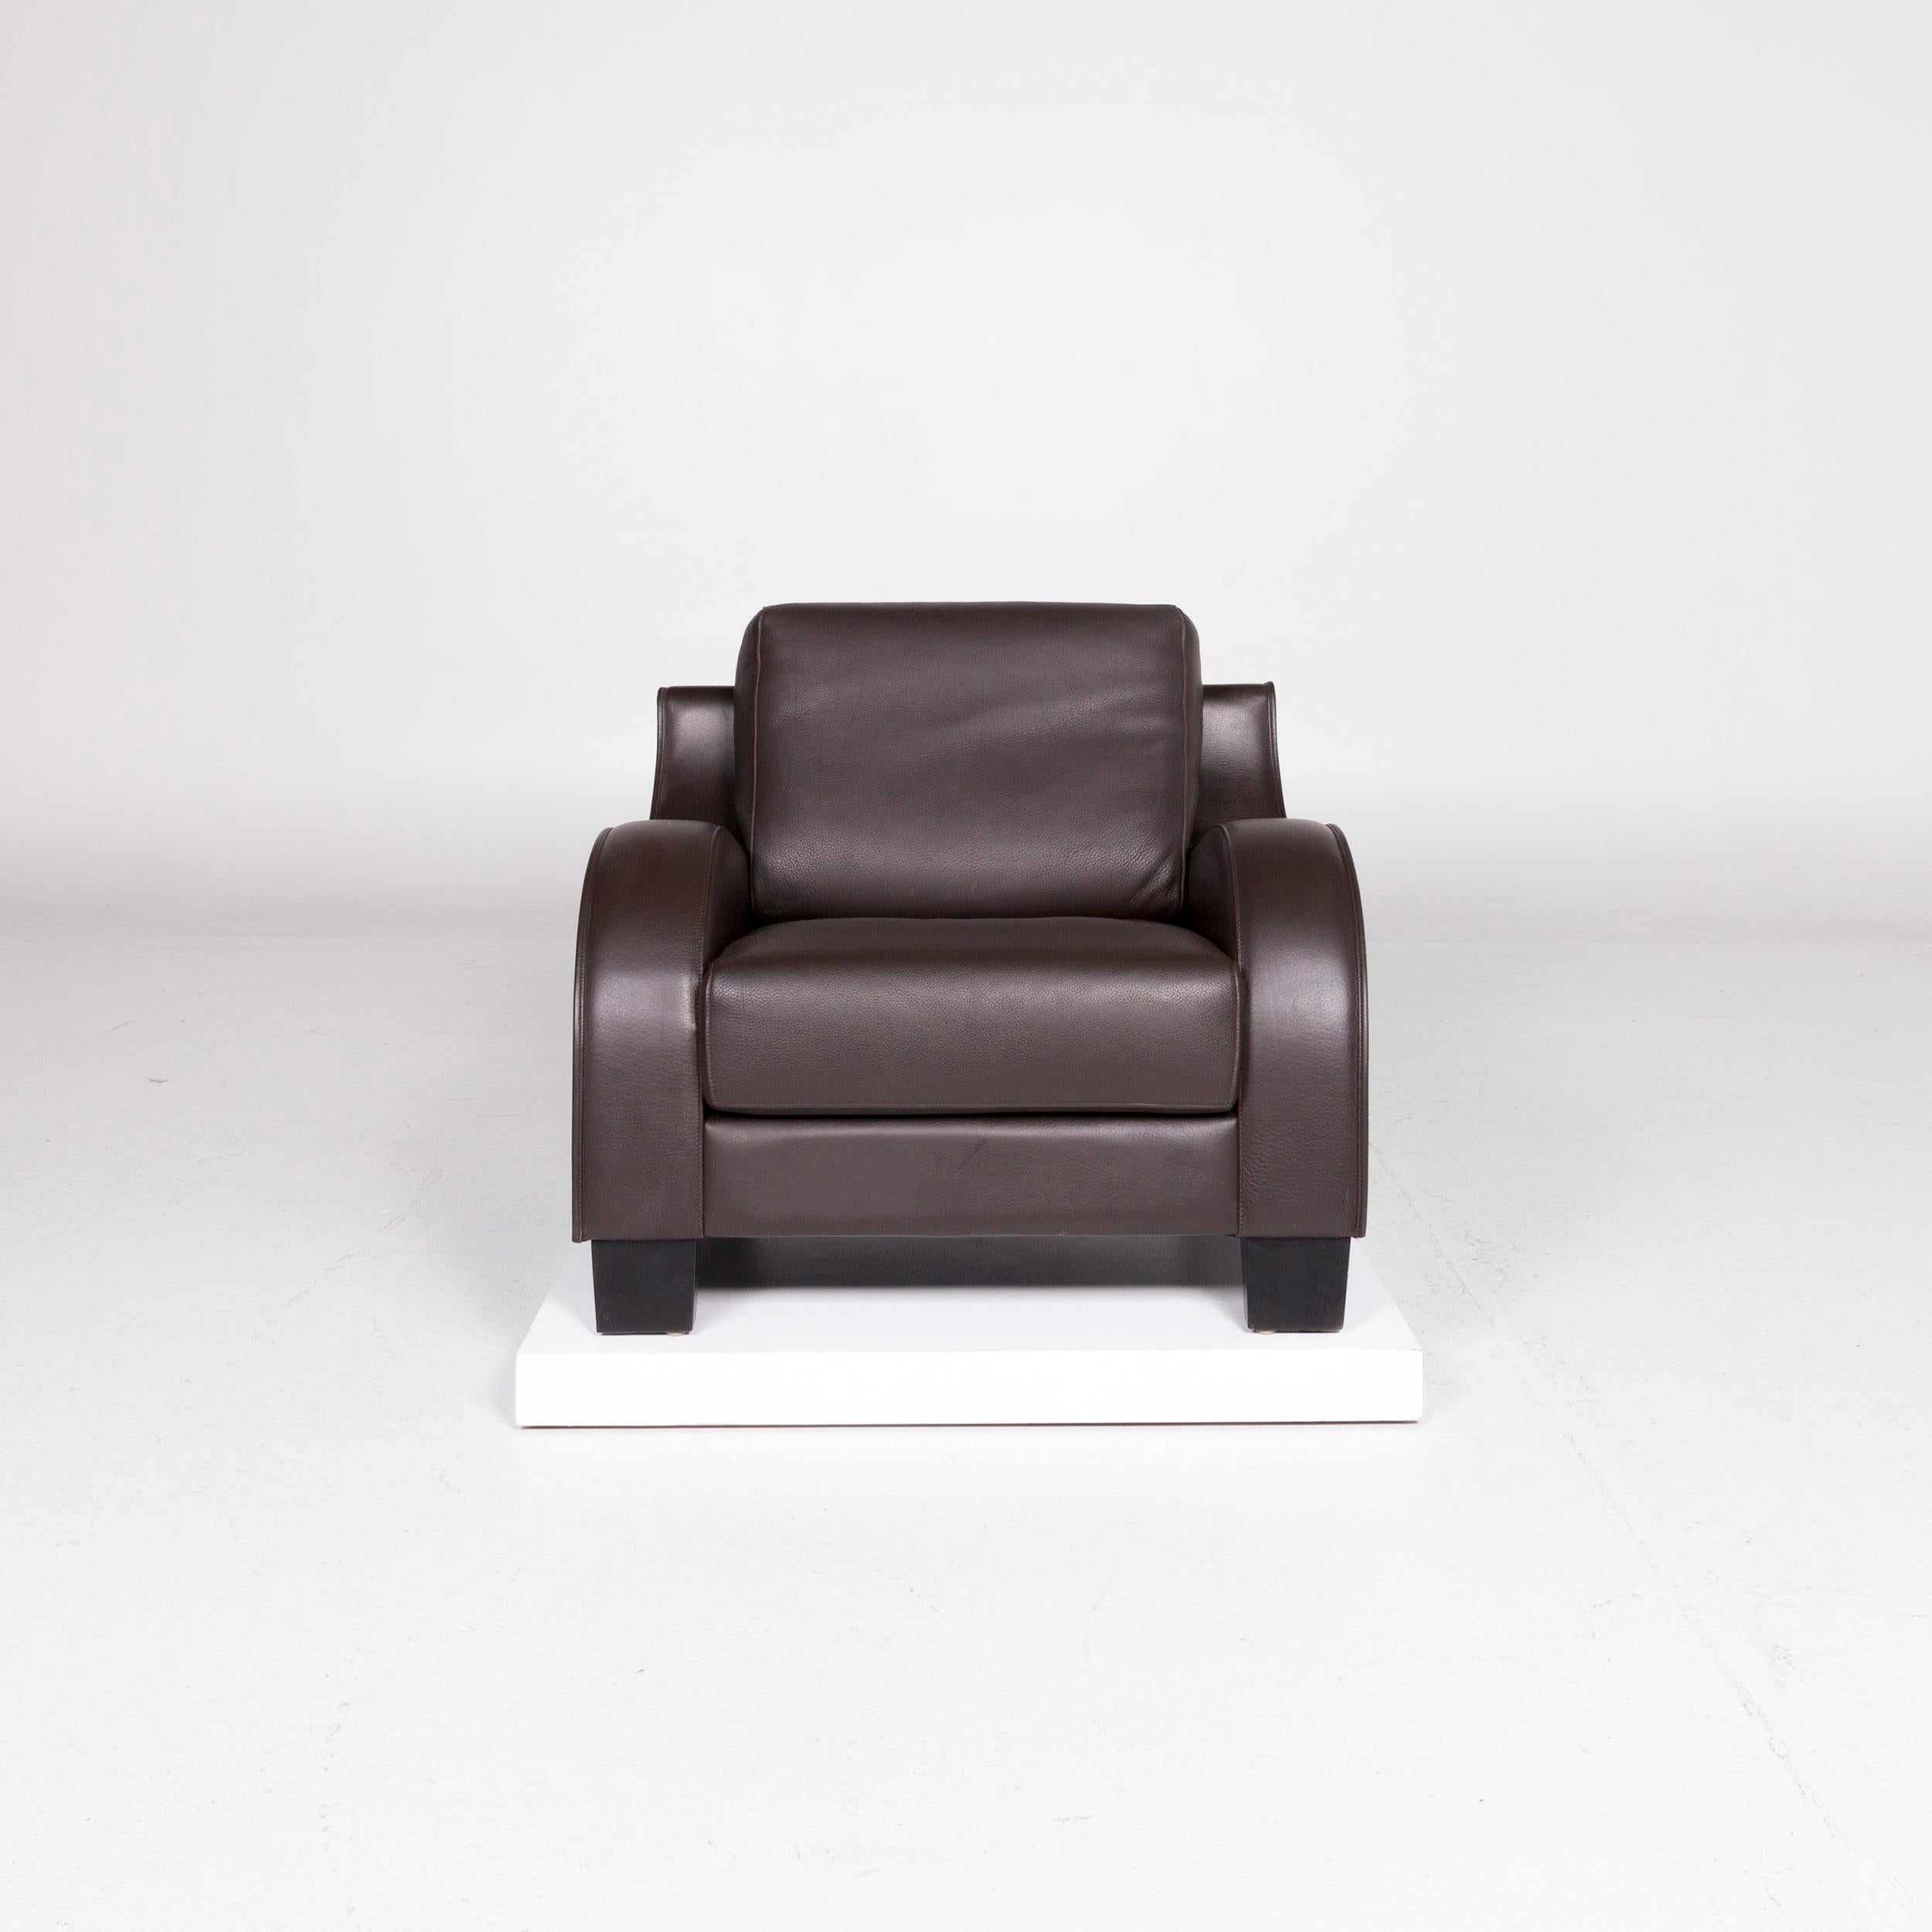 We present to you a de Sede DS 122-01 leather armchair brown.
 

 Product measurements in centimeters:
 

Depth: 91
Width: 89
Height: 80
Seat height: 44
Rest height: 55
Seat depth: 54
Seat width: 58
Back height: 37.
 